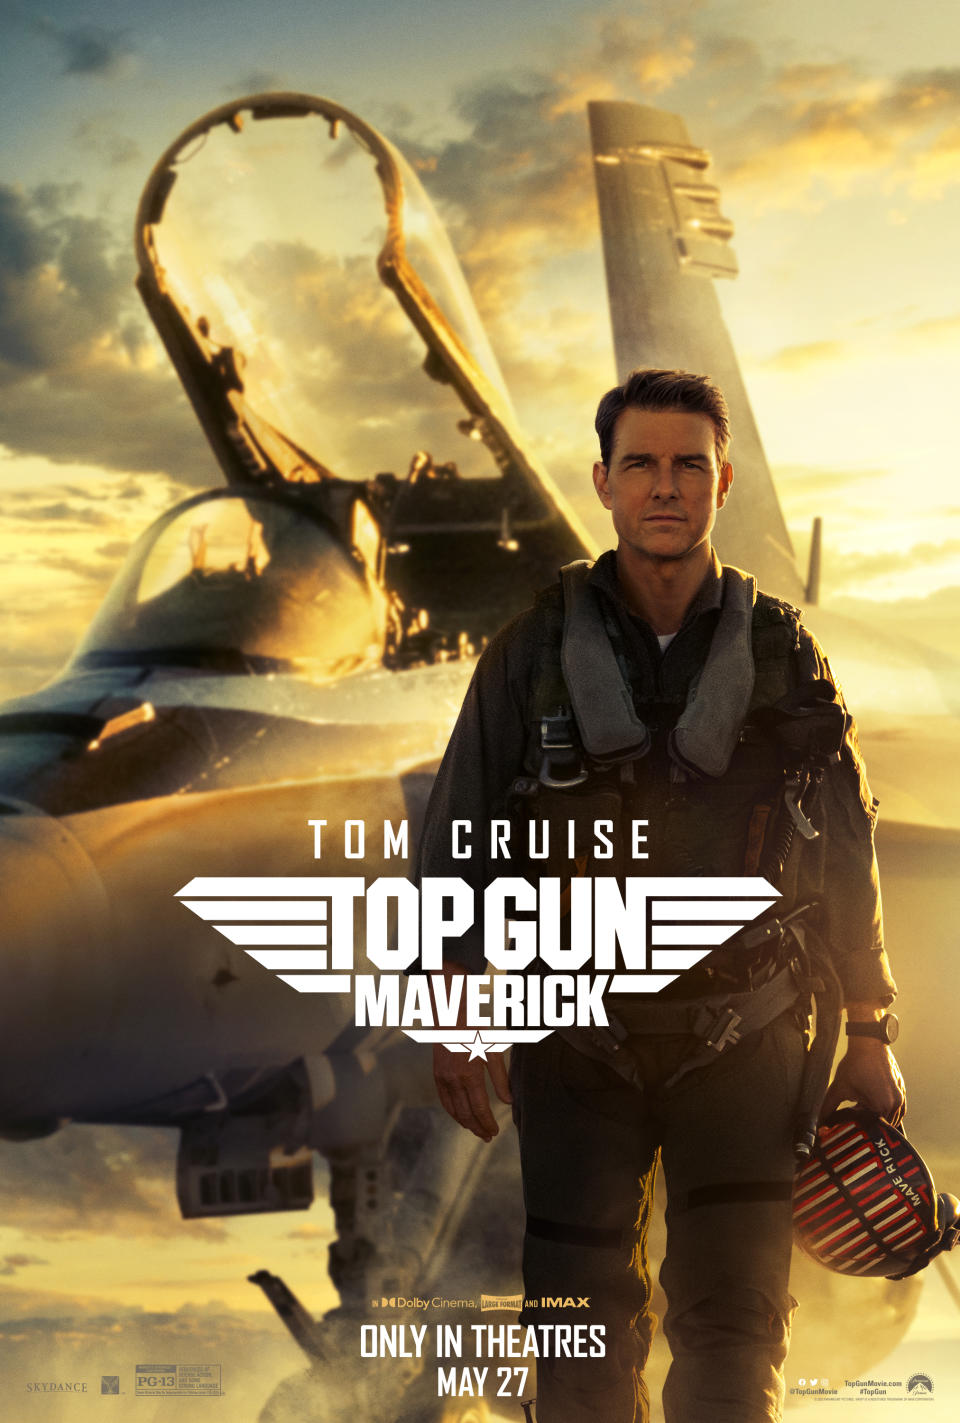 Paramount’s poster for “Top Gun: Maverick” highlights the movie is “only in theaters.”